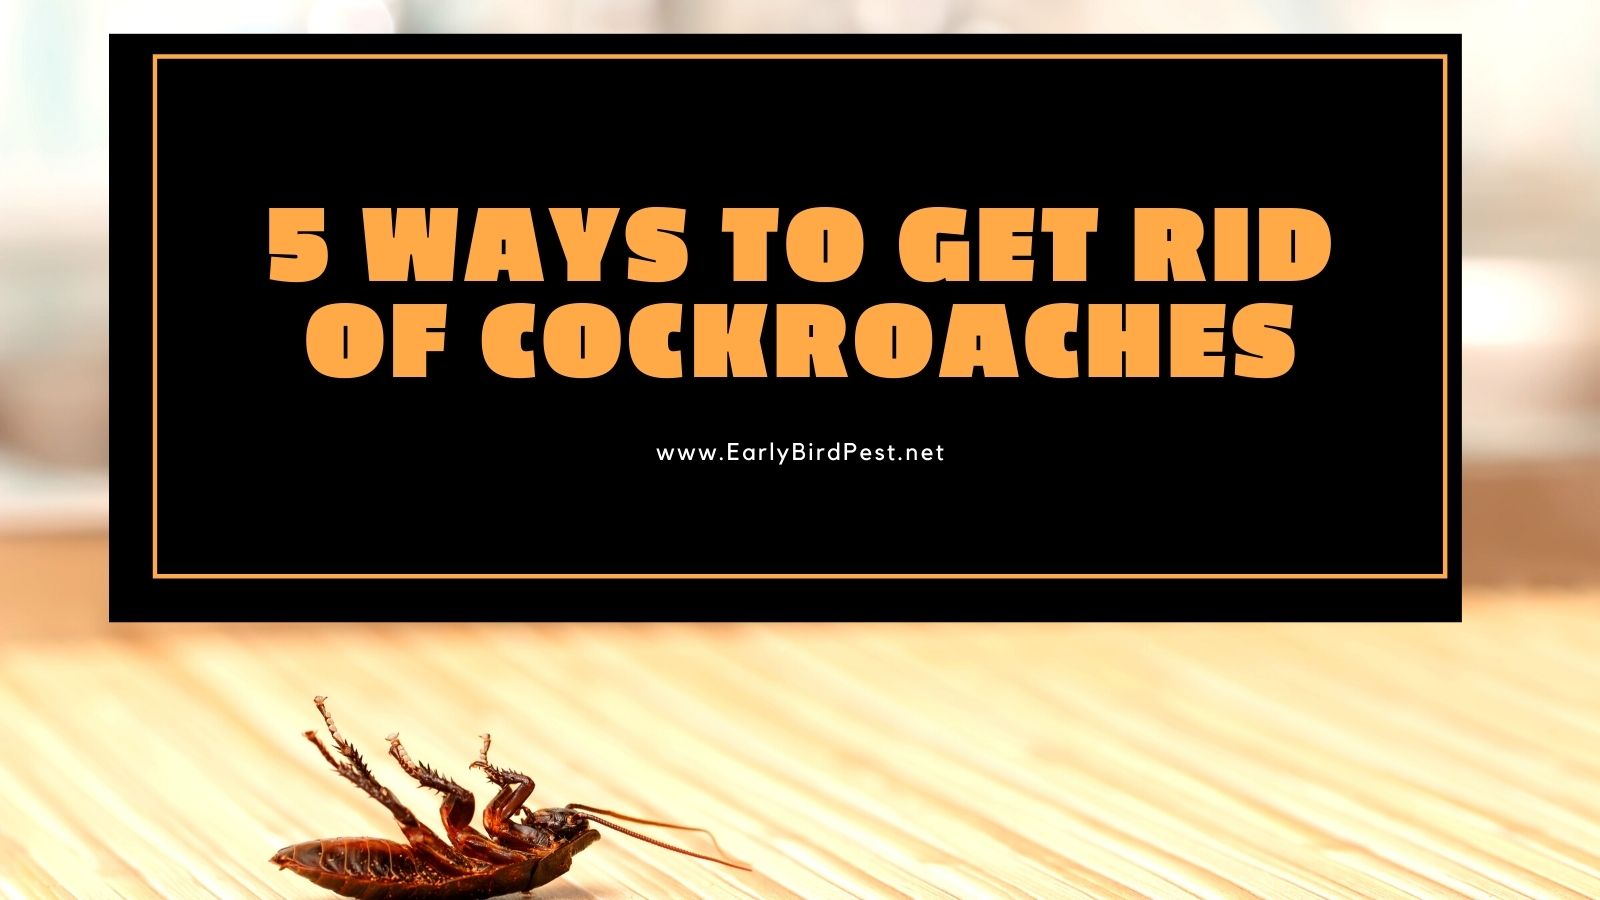 5 Ways to Get Rid of Cockroaches